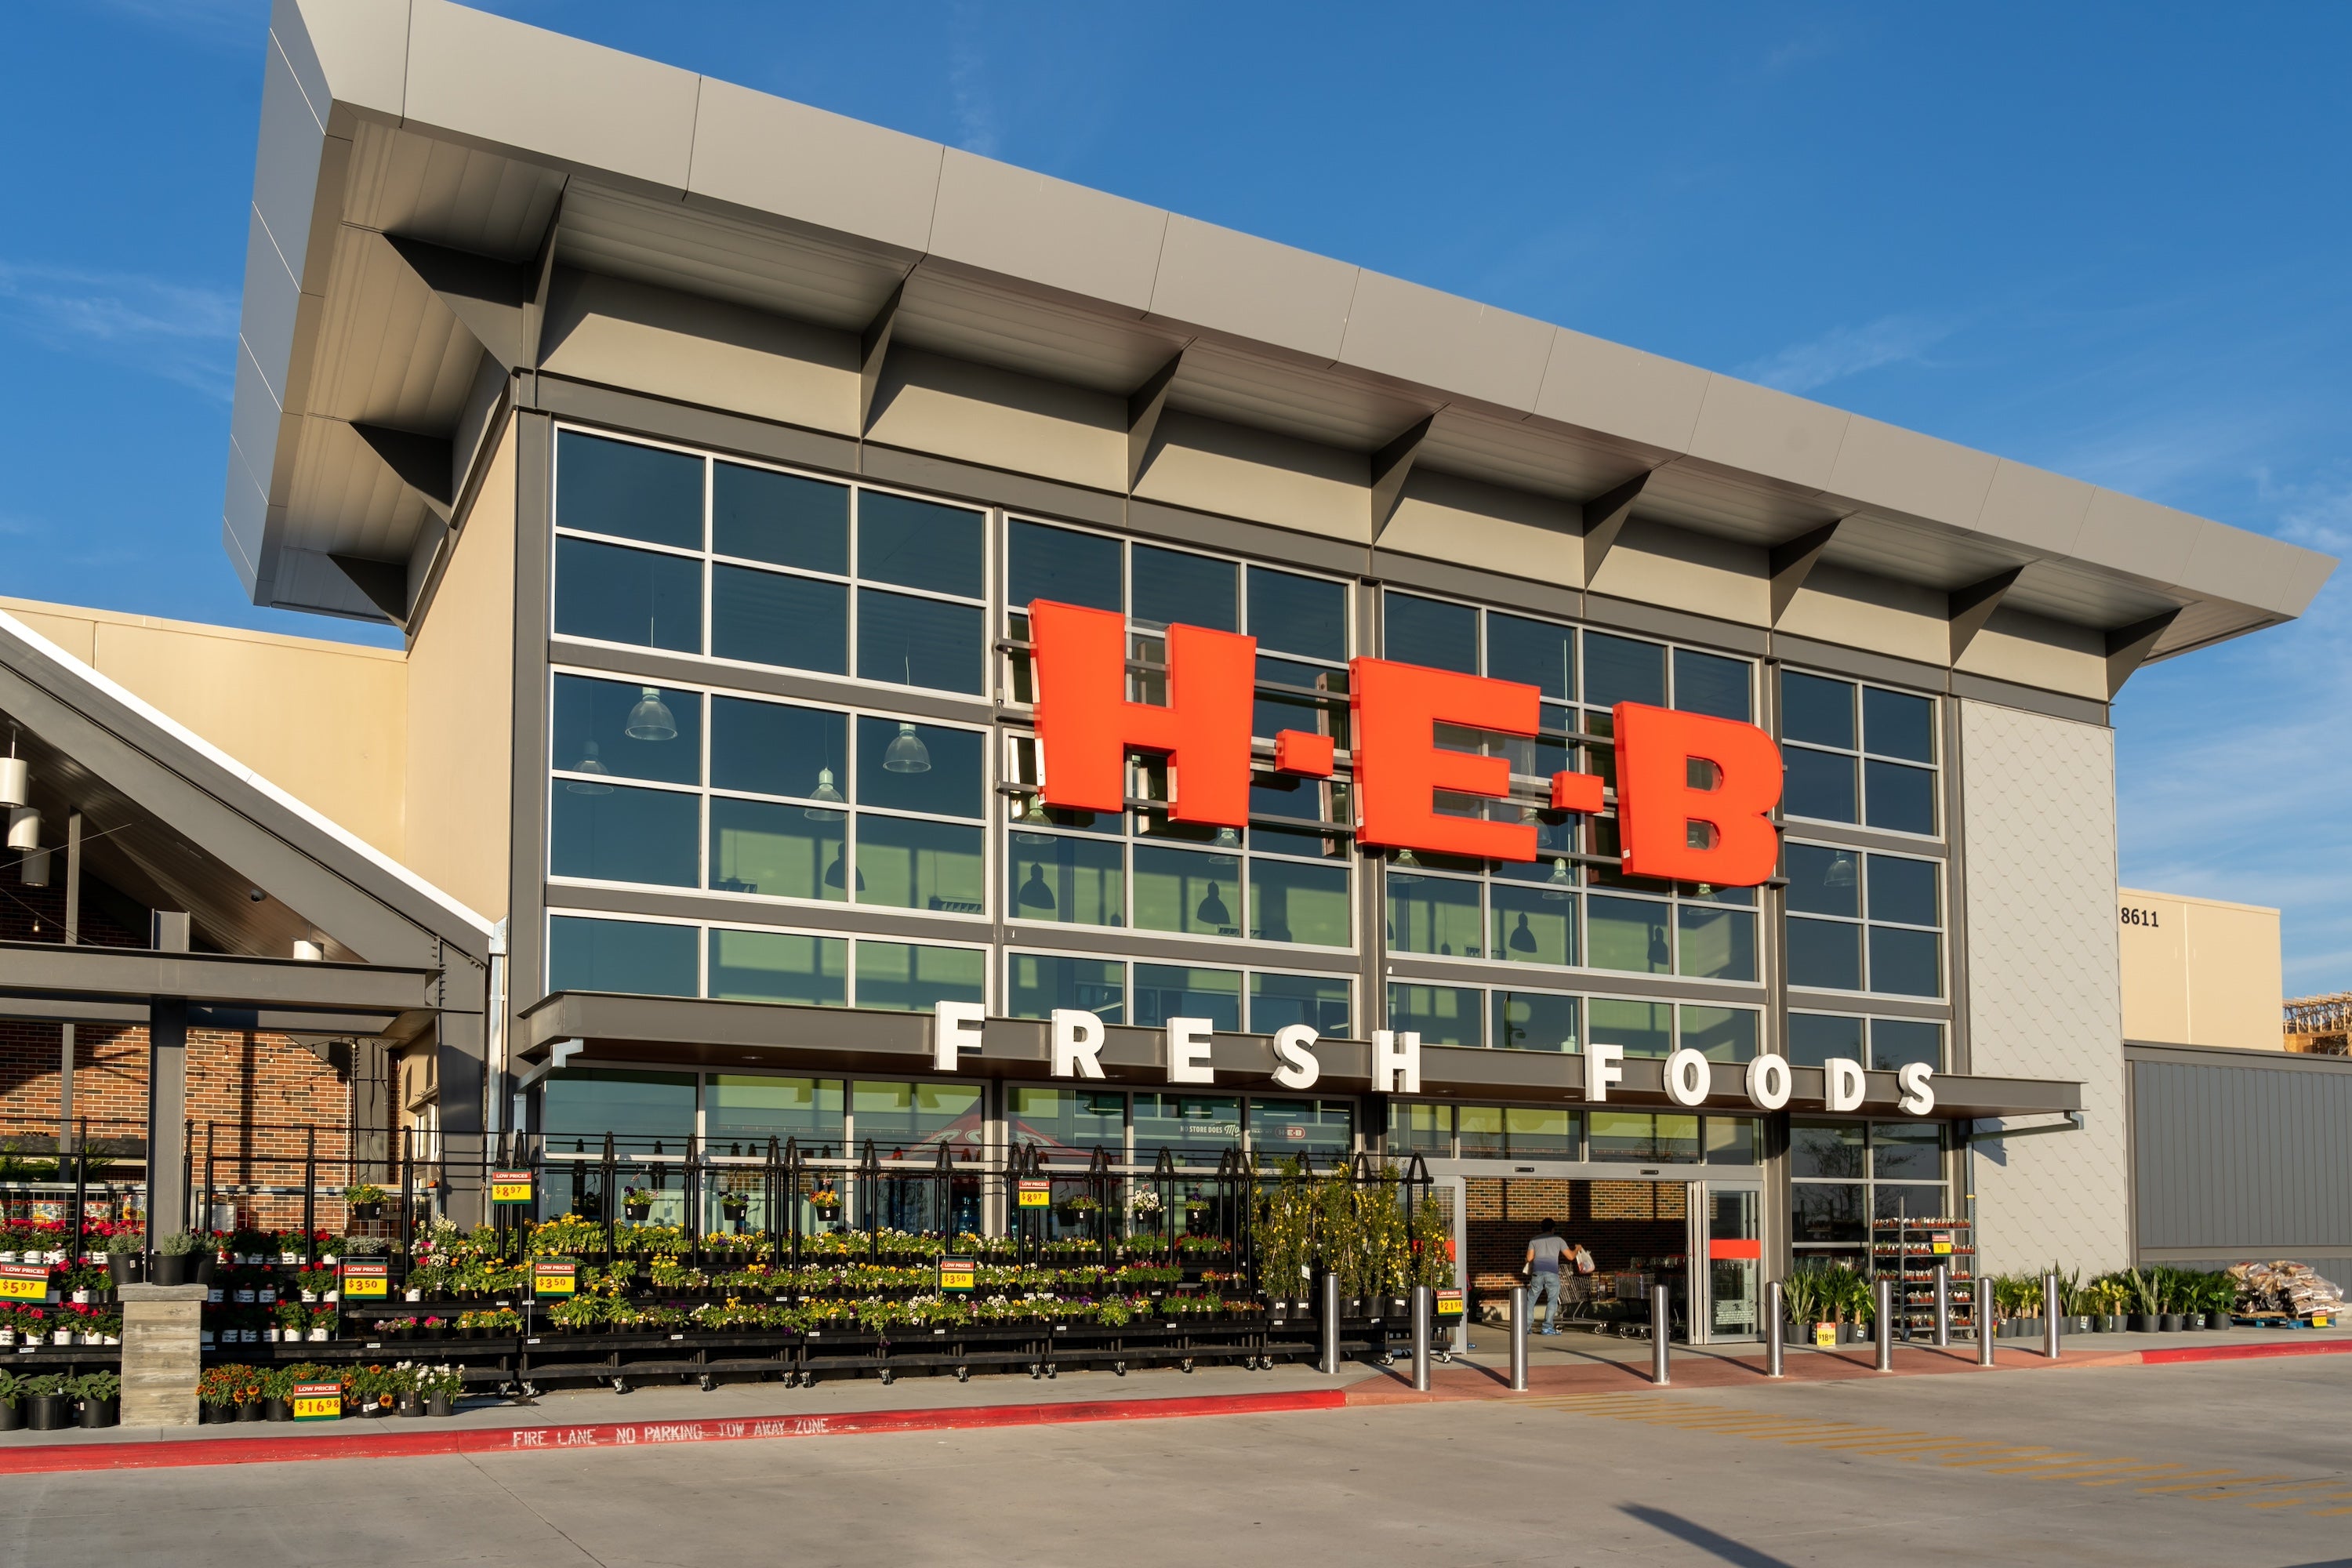 9 Healthy Snacks at H-E-B You Don’t Want to Miss